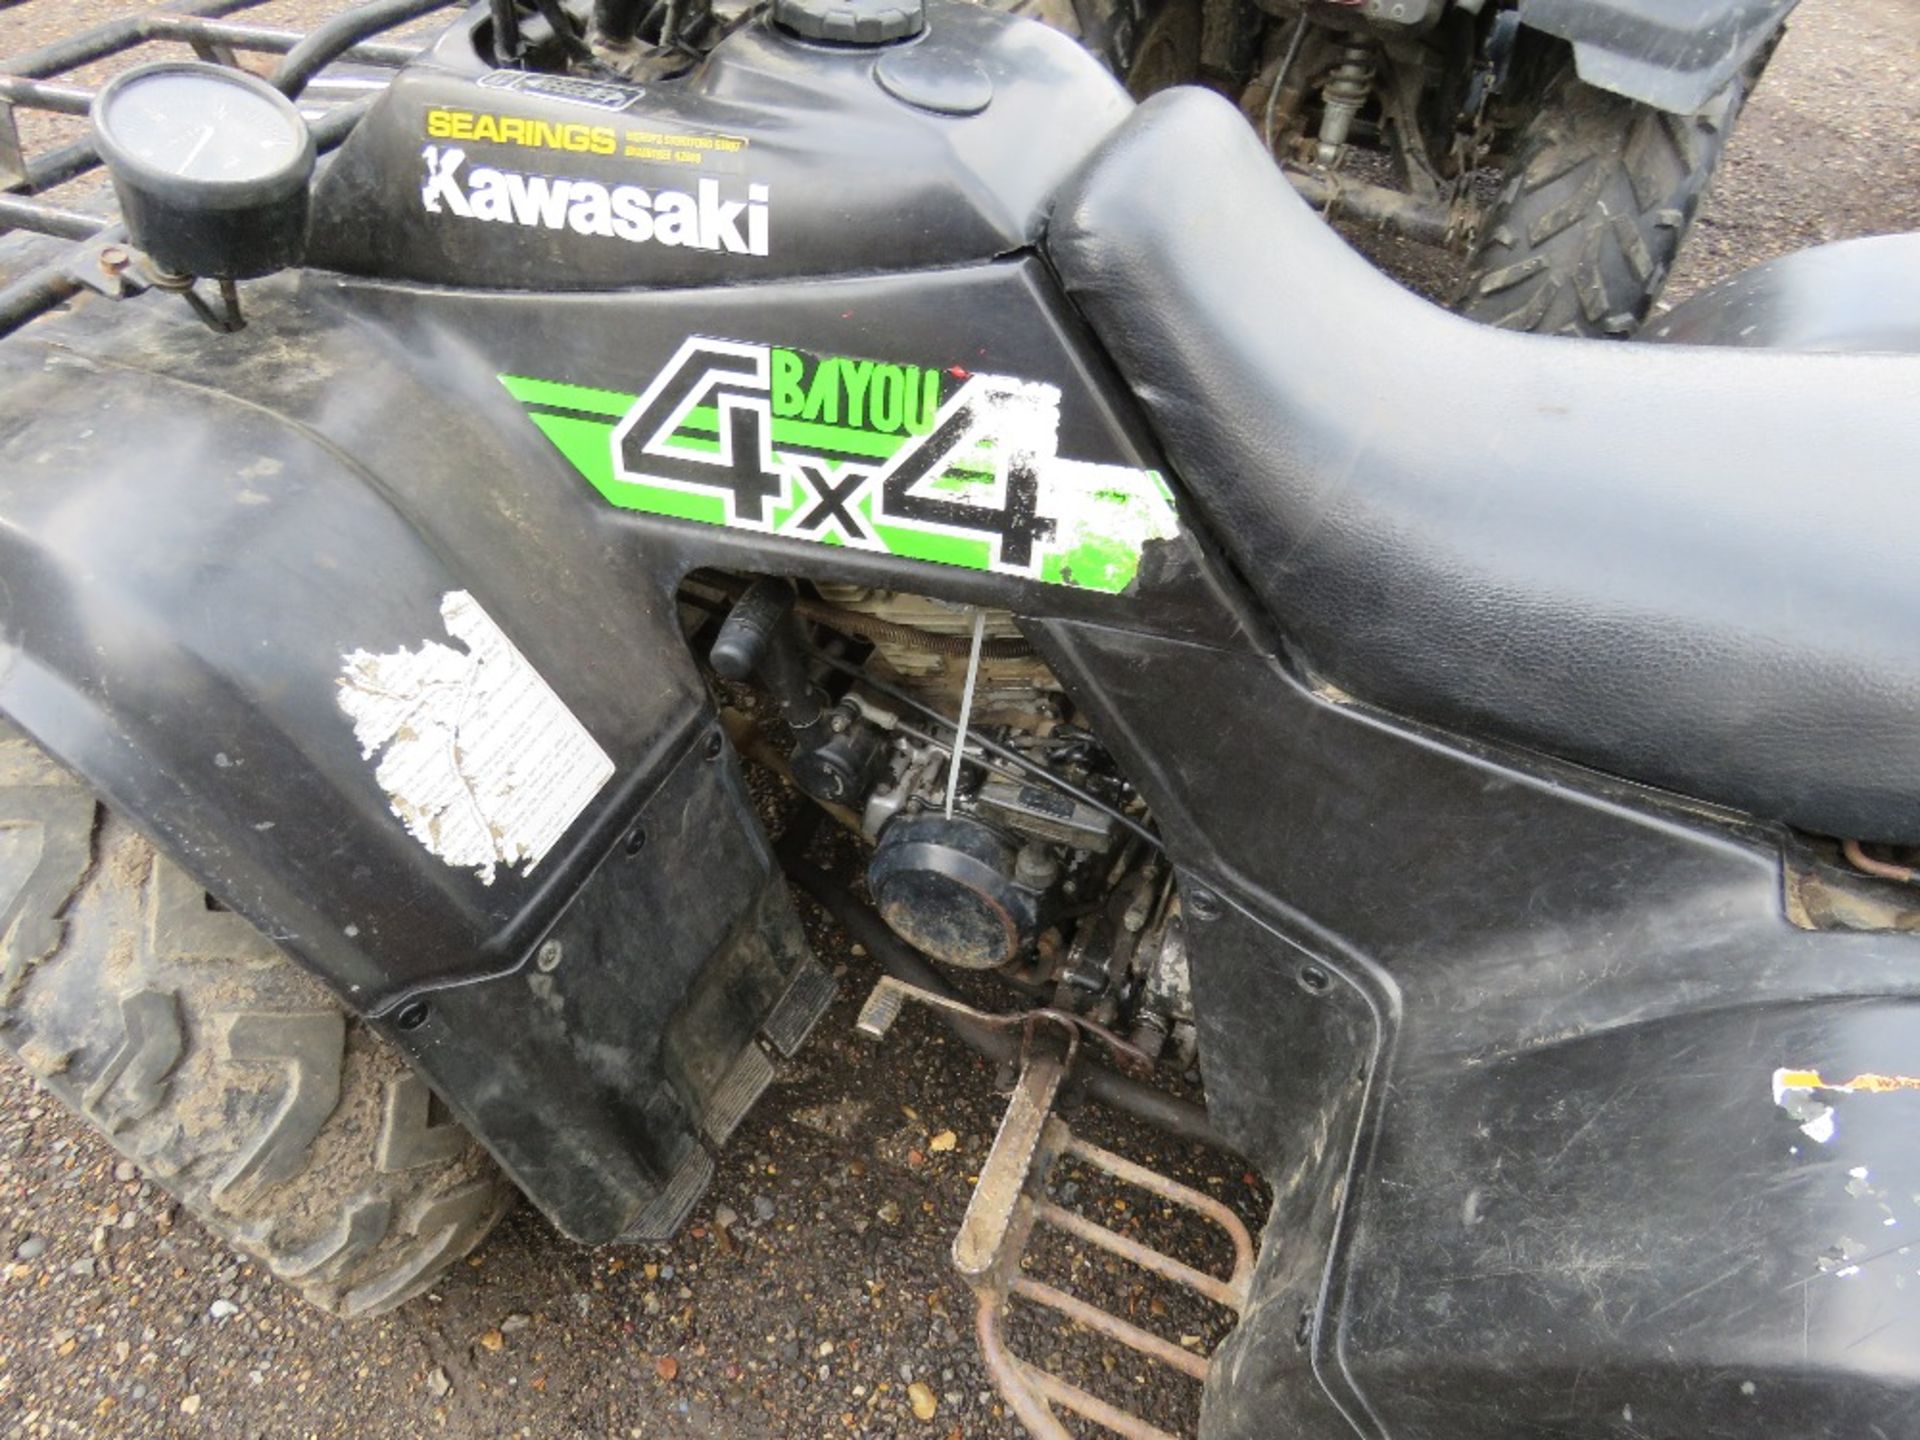 KAWASAKI BAYOU 4WD QUAD BIKE 5174REC MILES, . WHEN TESTED WAS SEEN TO DRIVE, STEER AND BRAKE, STA - Image 4 of 6